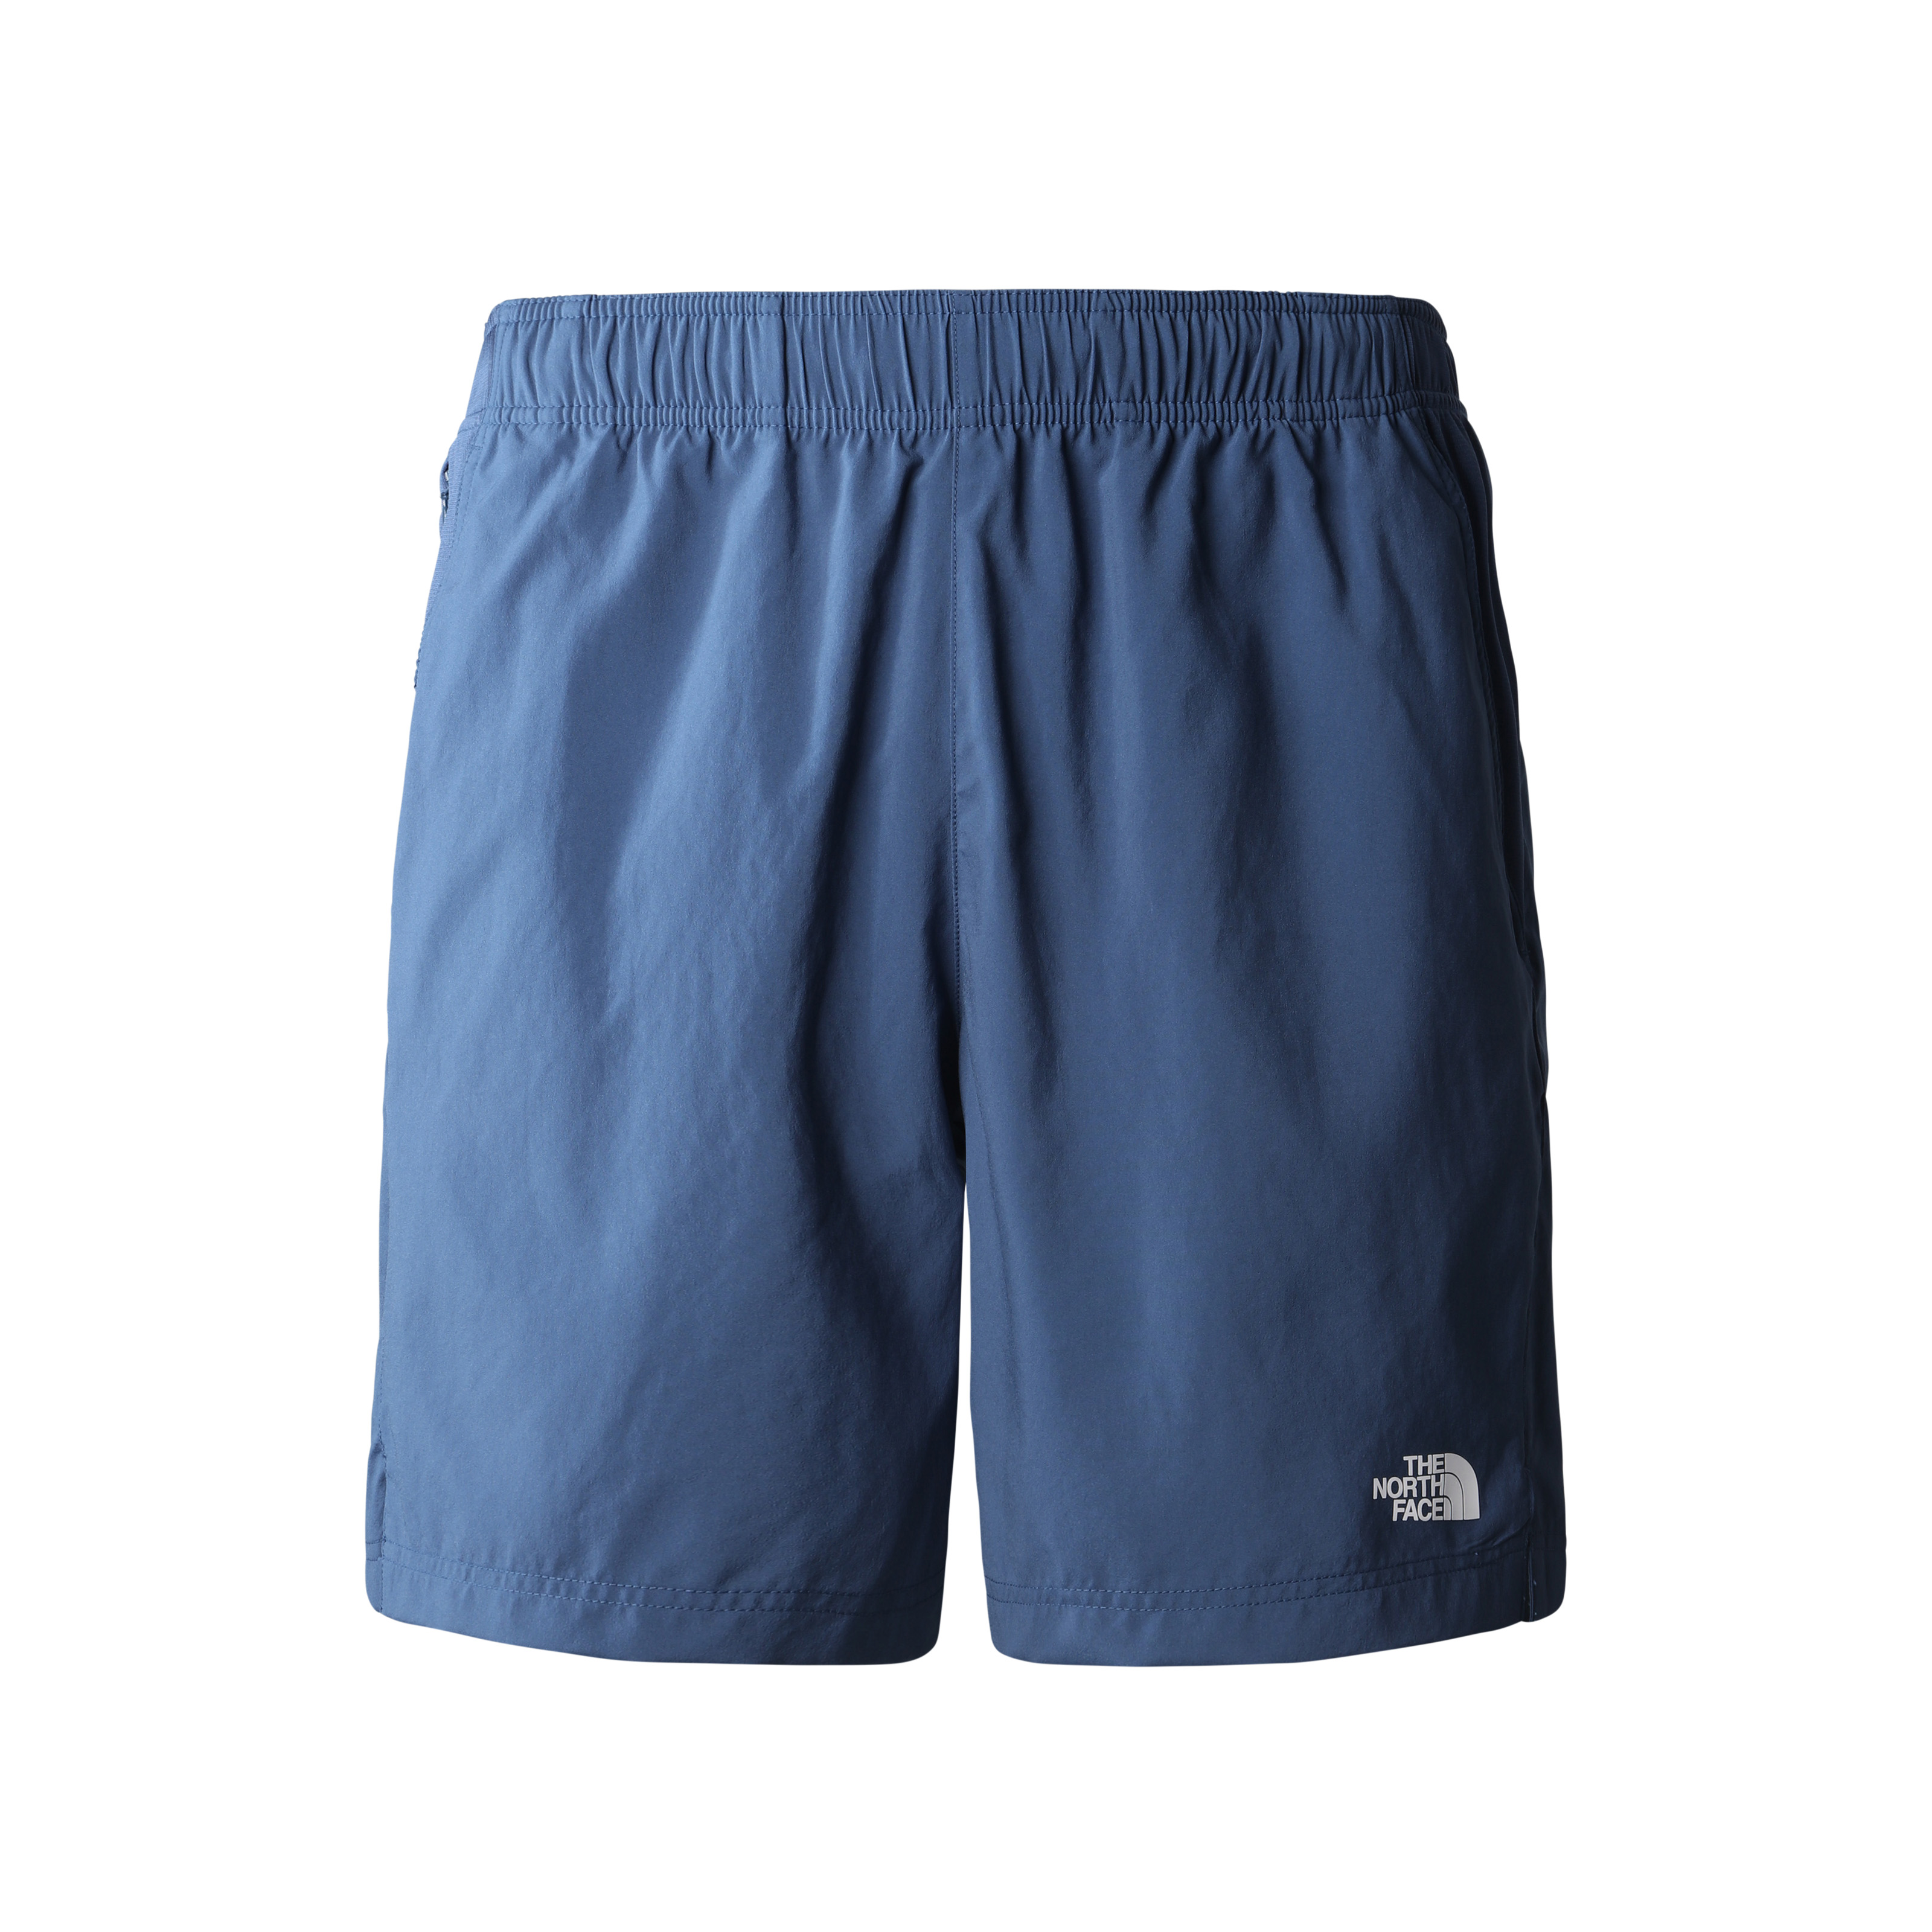 The North Face Mens 24/7 Short